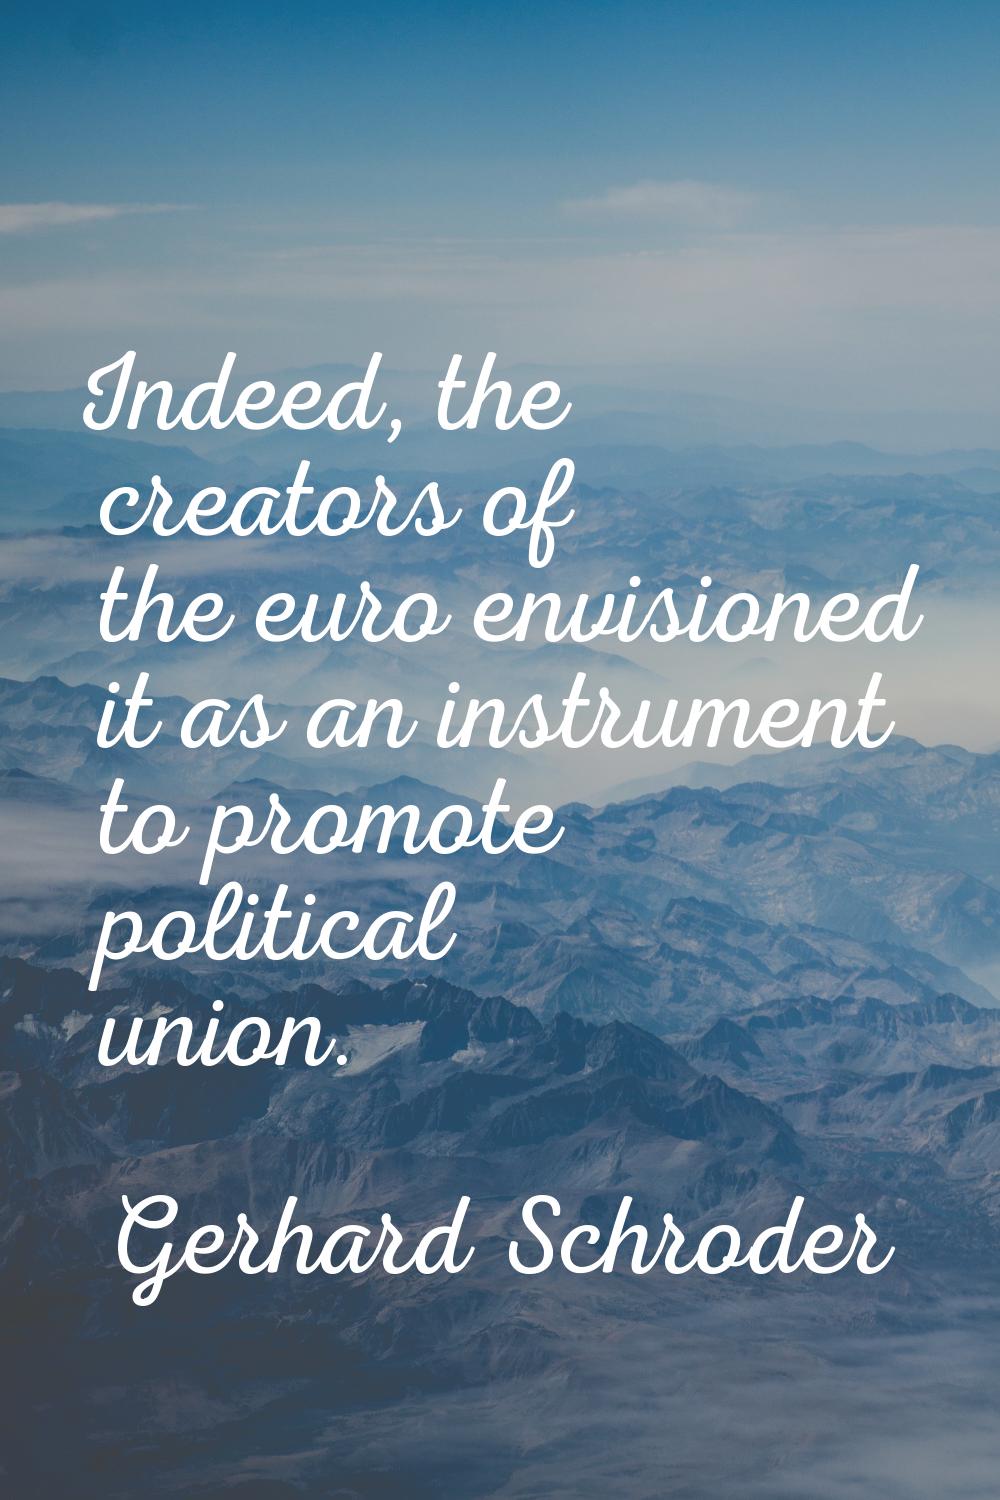 Indeed, the creators of the euro envisioned it as an instrument to promote political union.